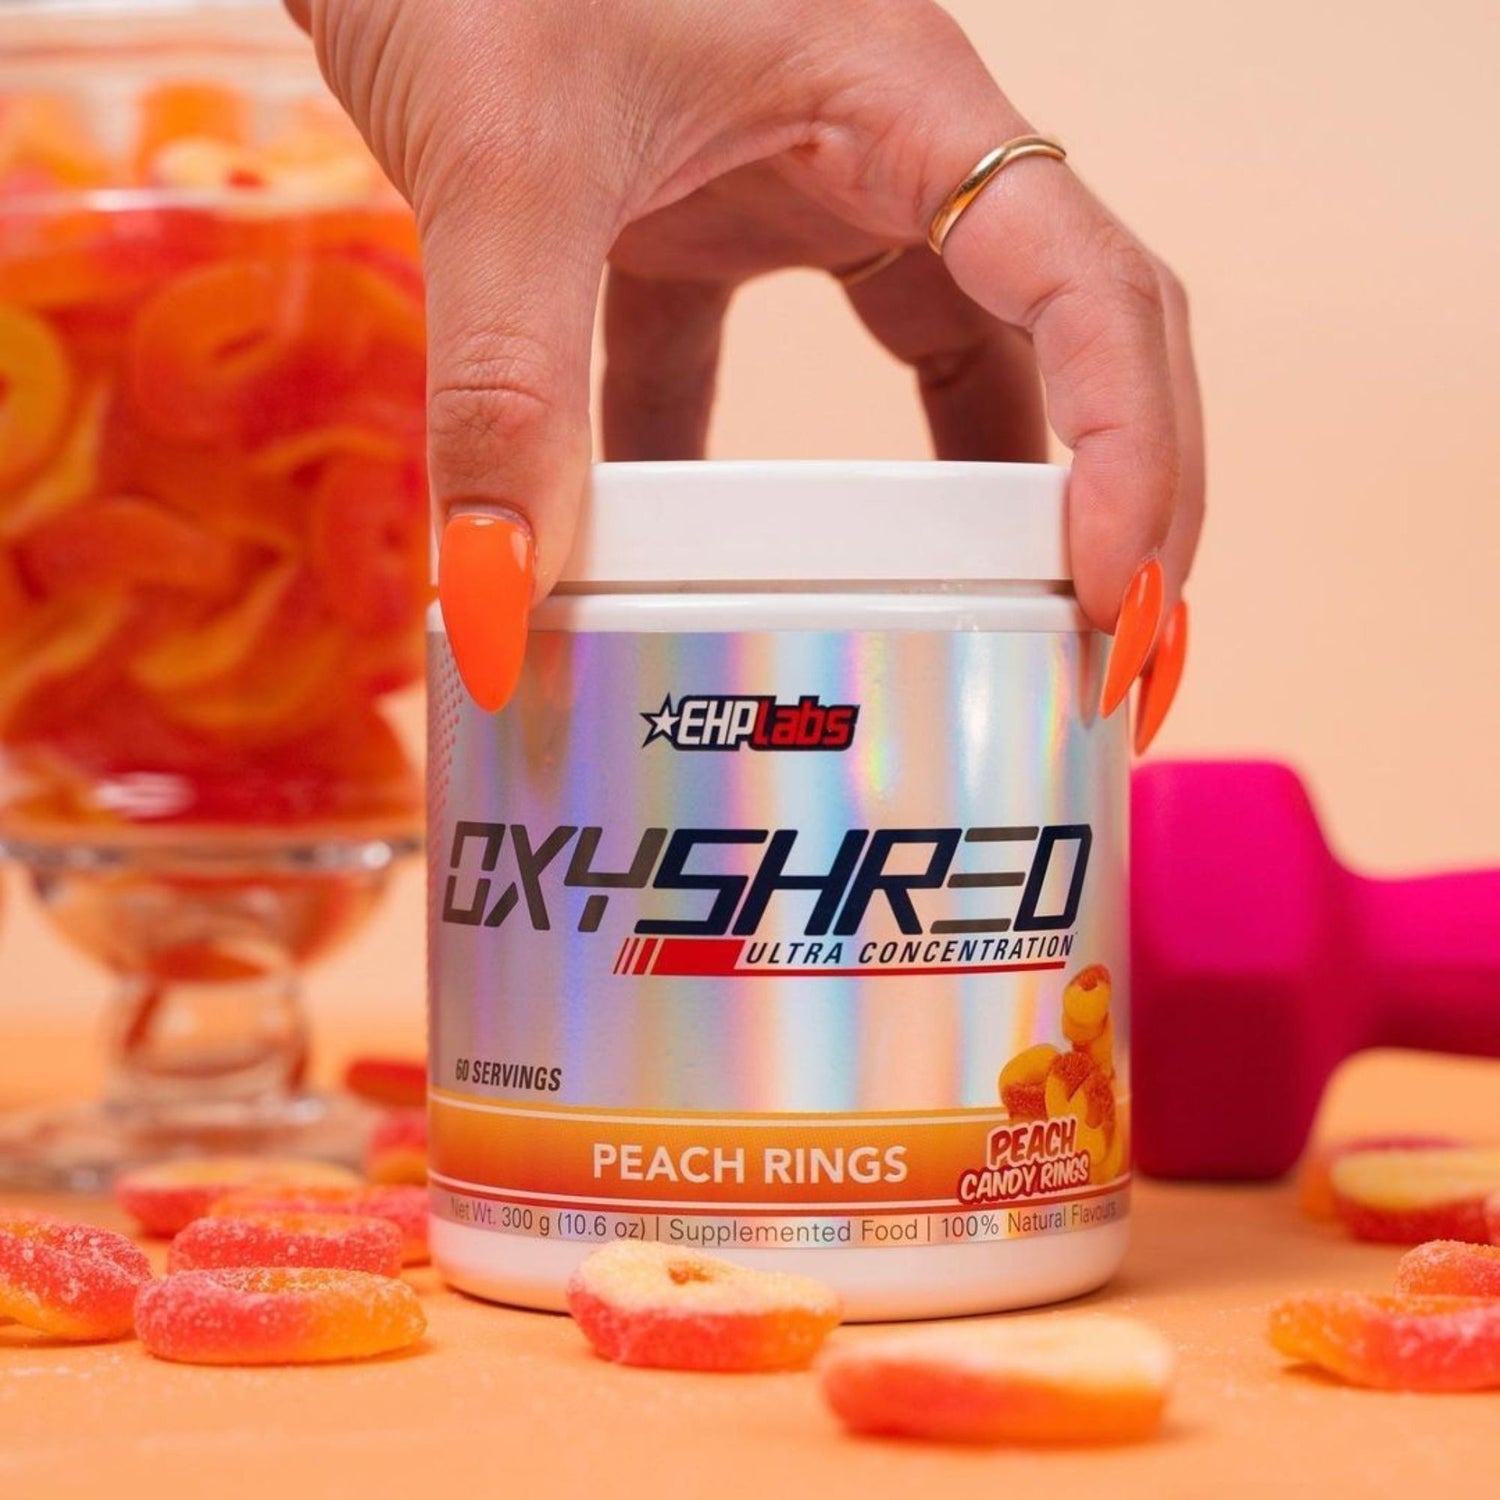 EHP Labs Oxyshred Thermogenic